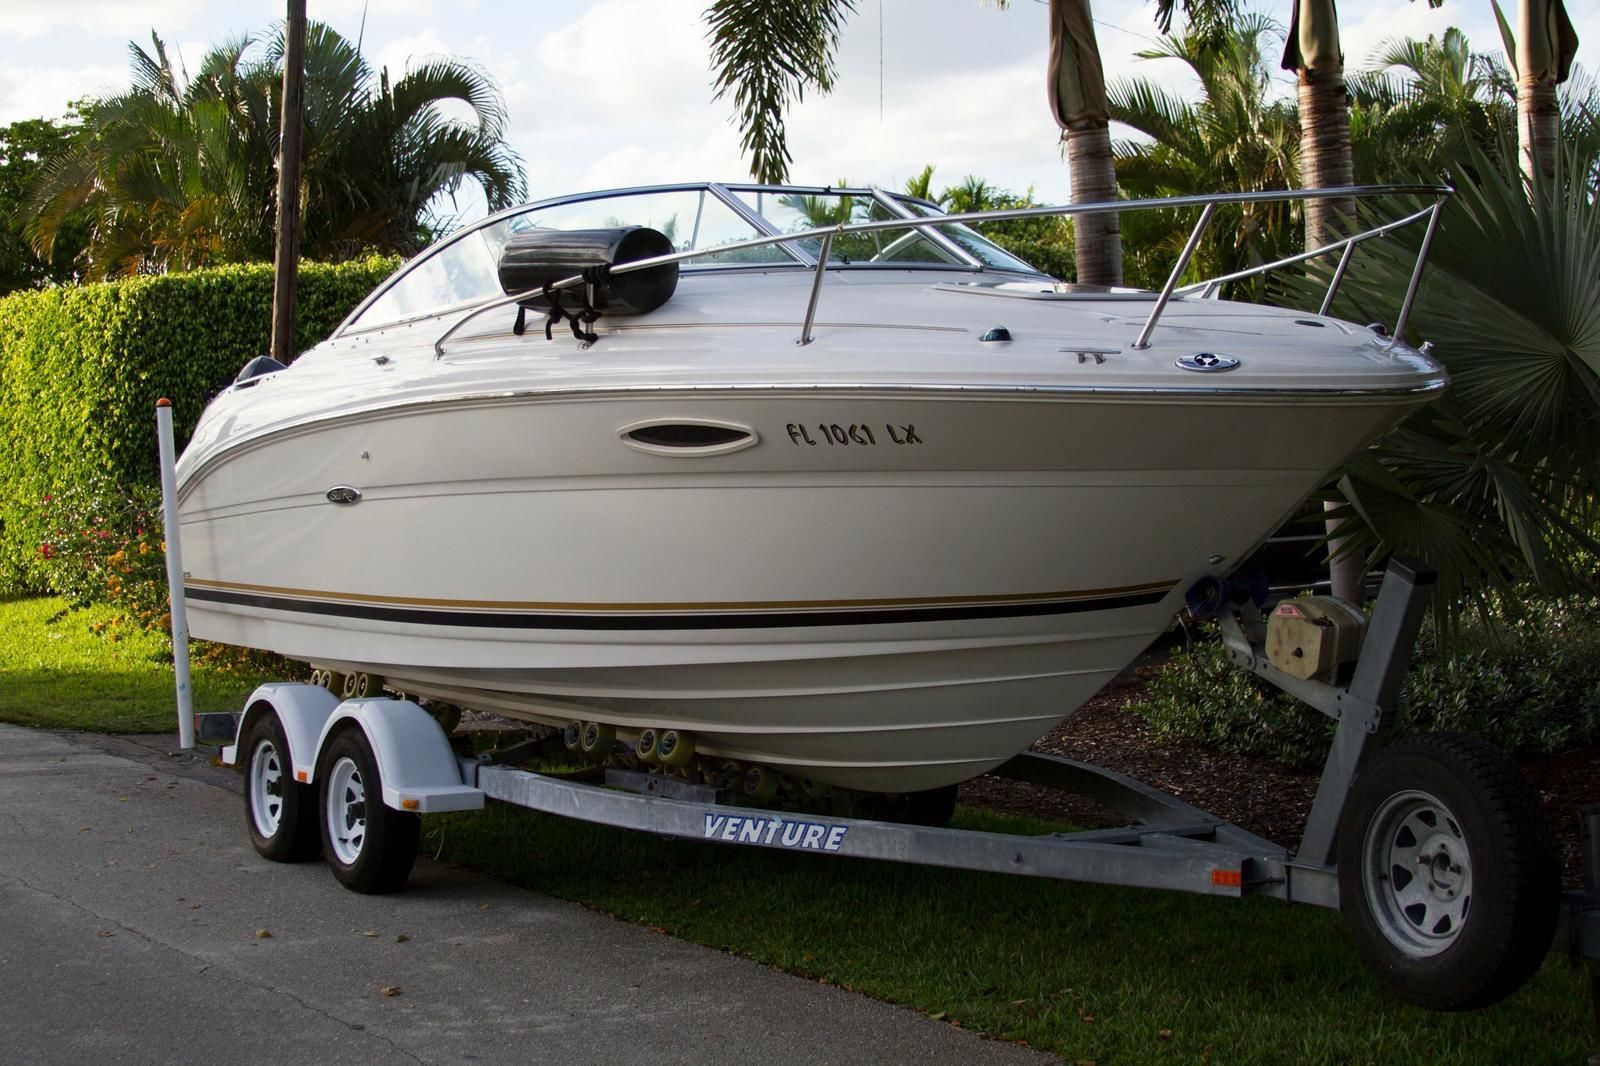 24 foot boats for sale